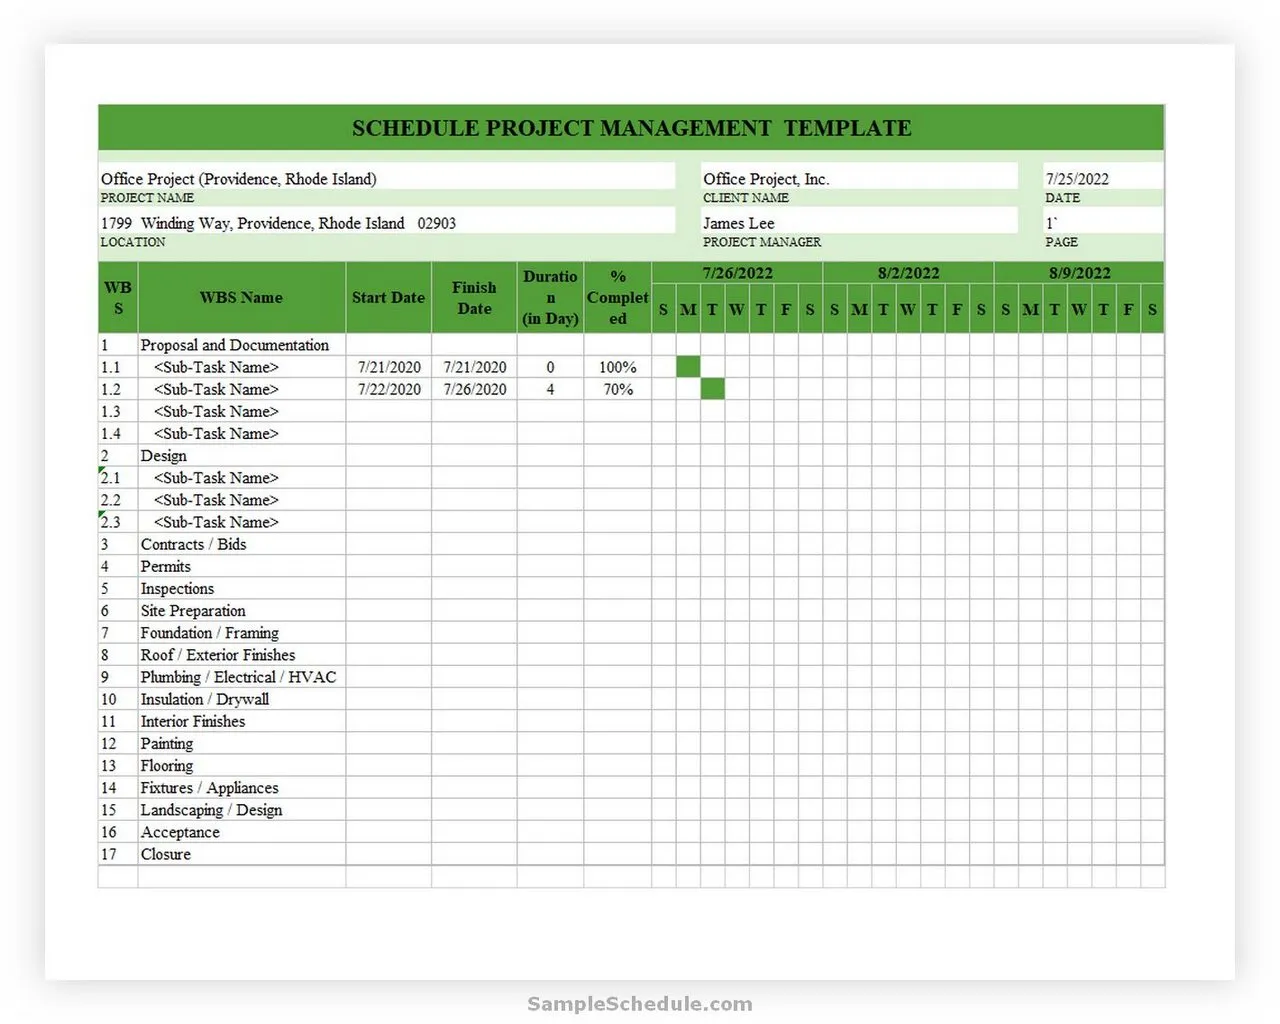 Project Management Schedule Template eXCEL